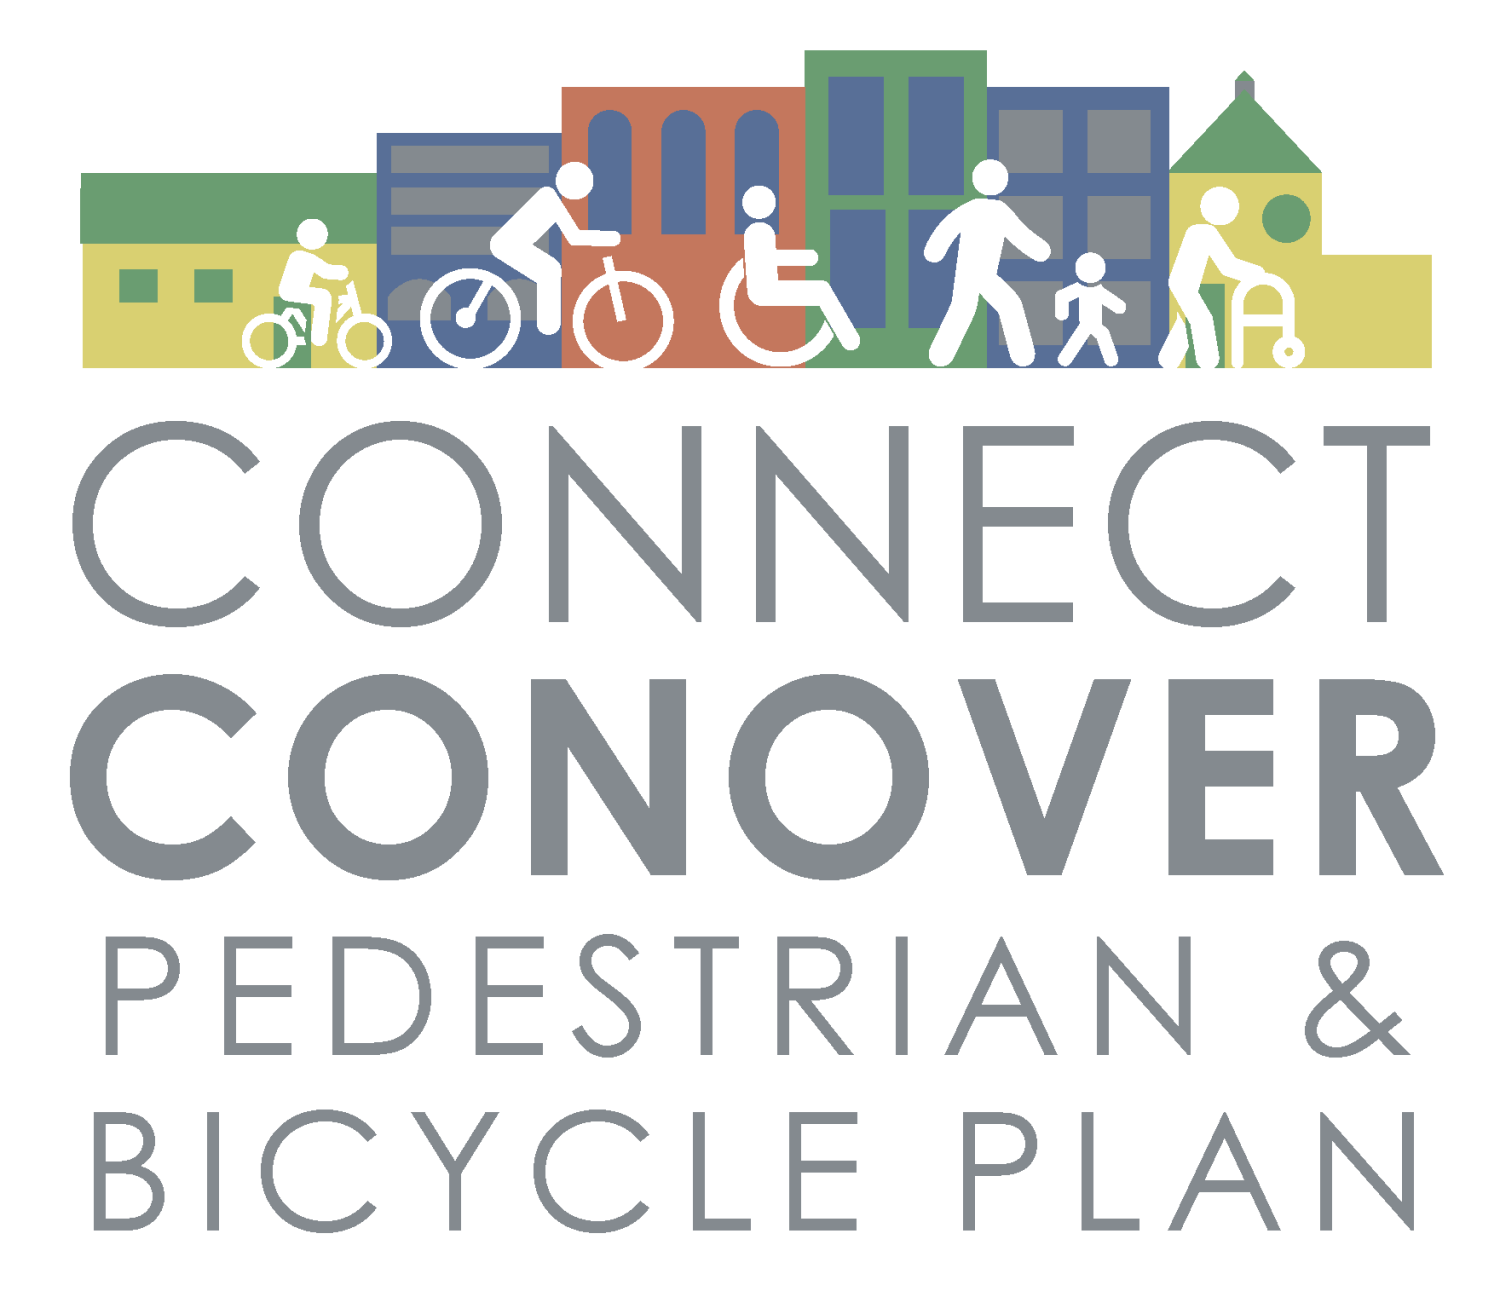 Featured image for Connect Conover Pedestrian & Bicycle Plan